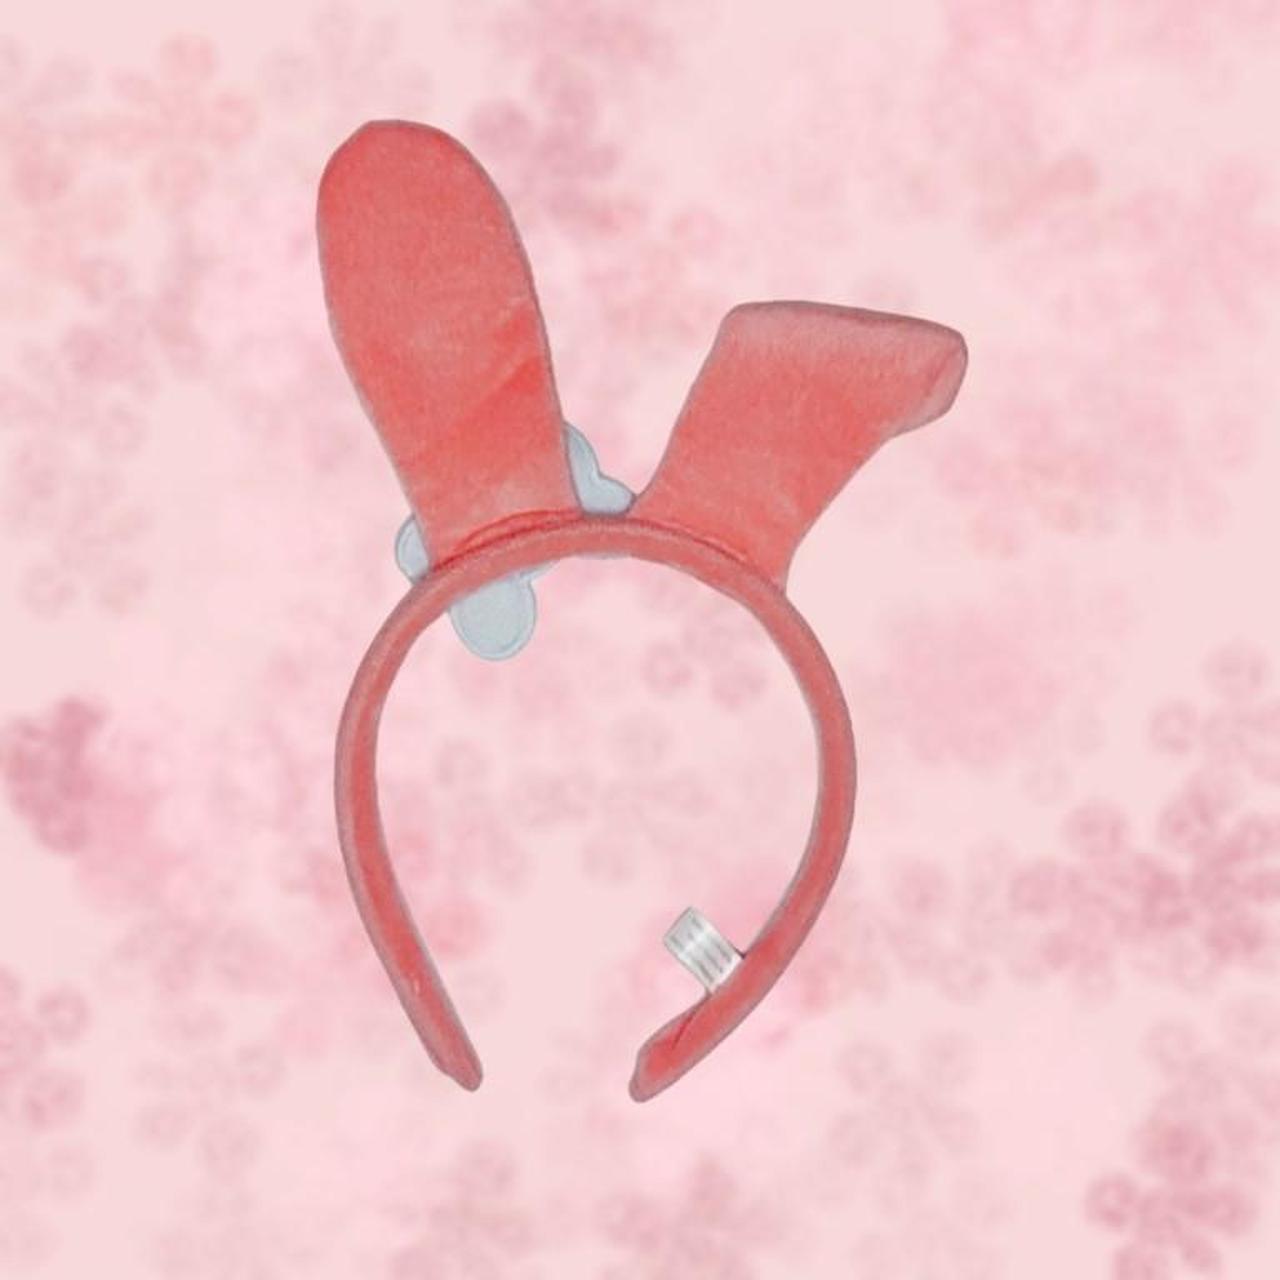 Sanrio Women's Pink and Blue Hair-accessories (2)